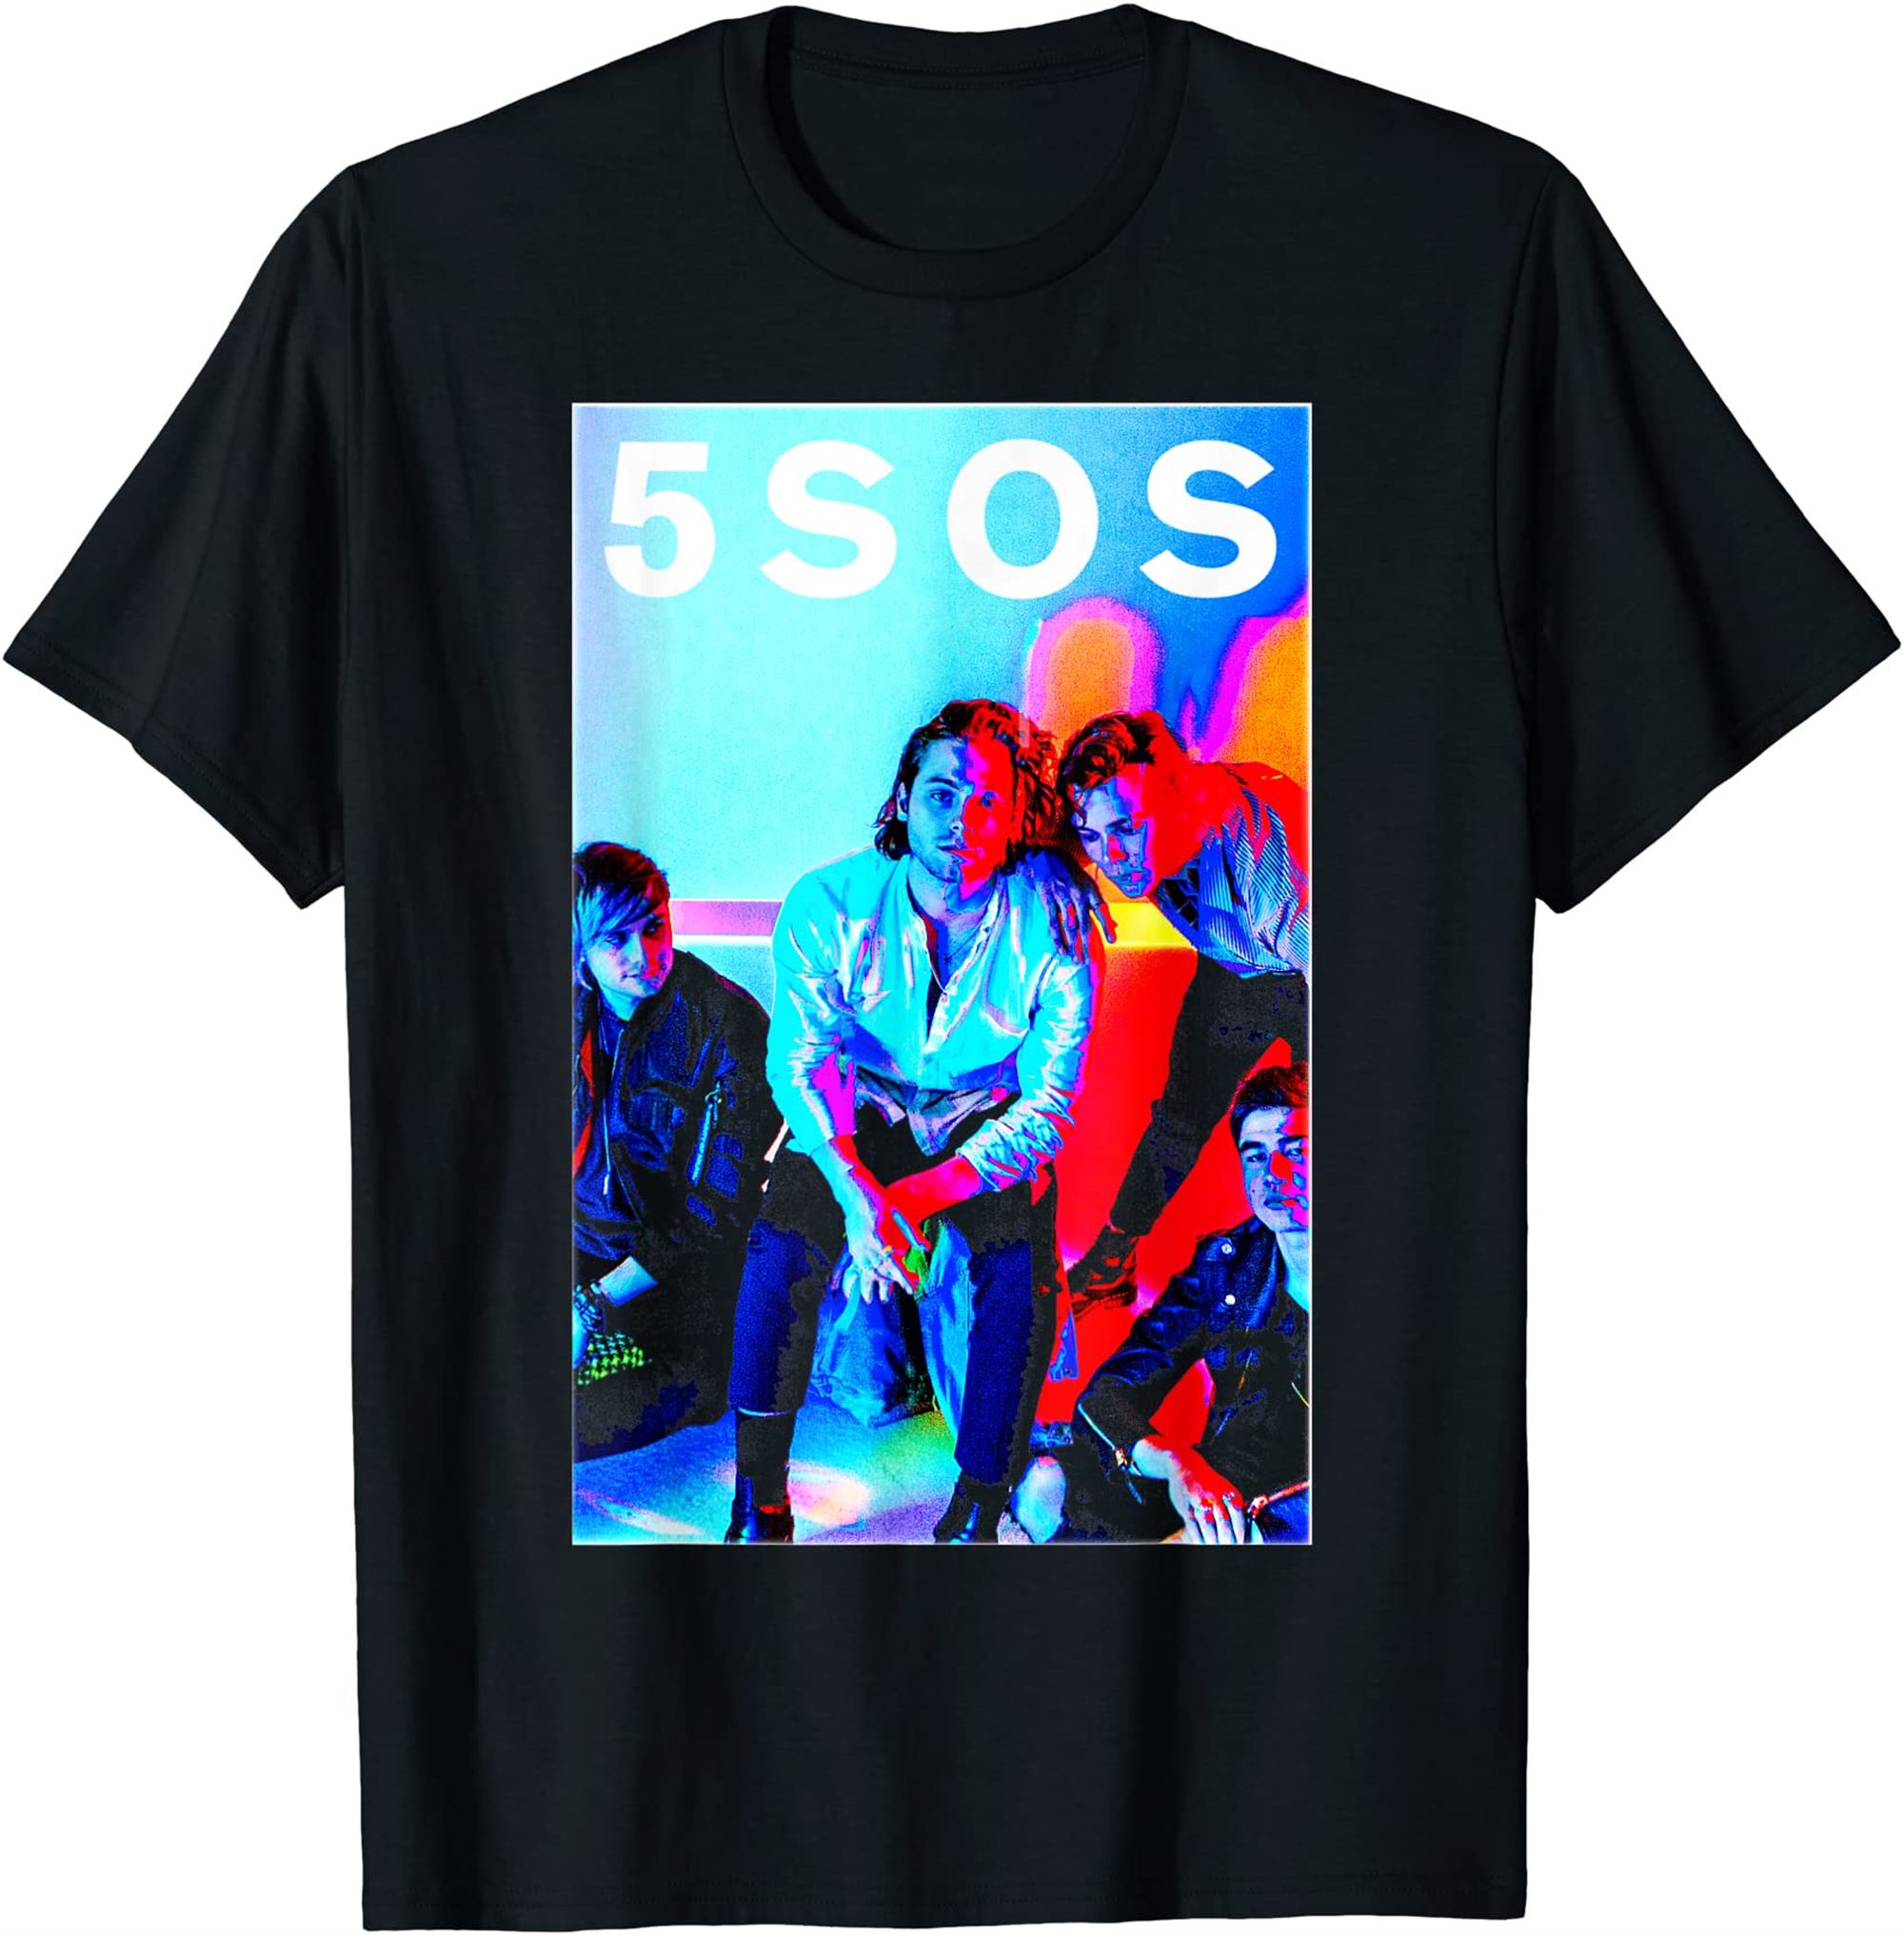 5 Seconds Of Summer 5sos Band Photo T-shirt Size Up To 5xl